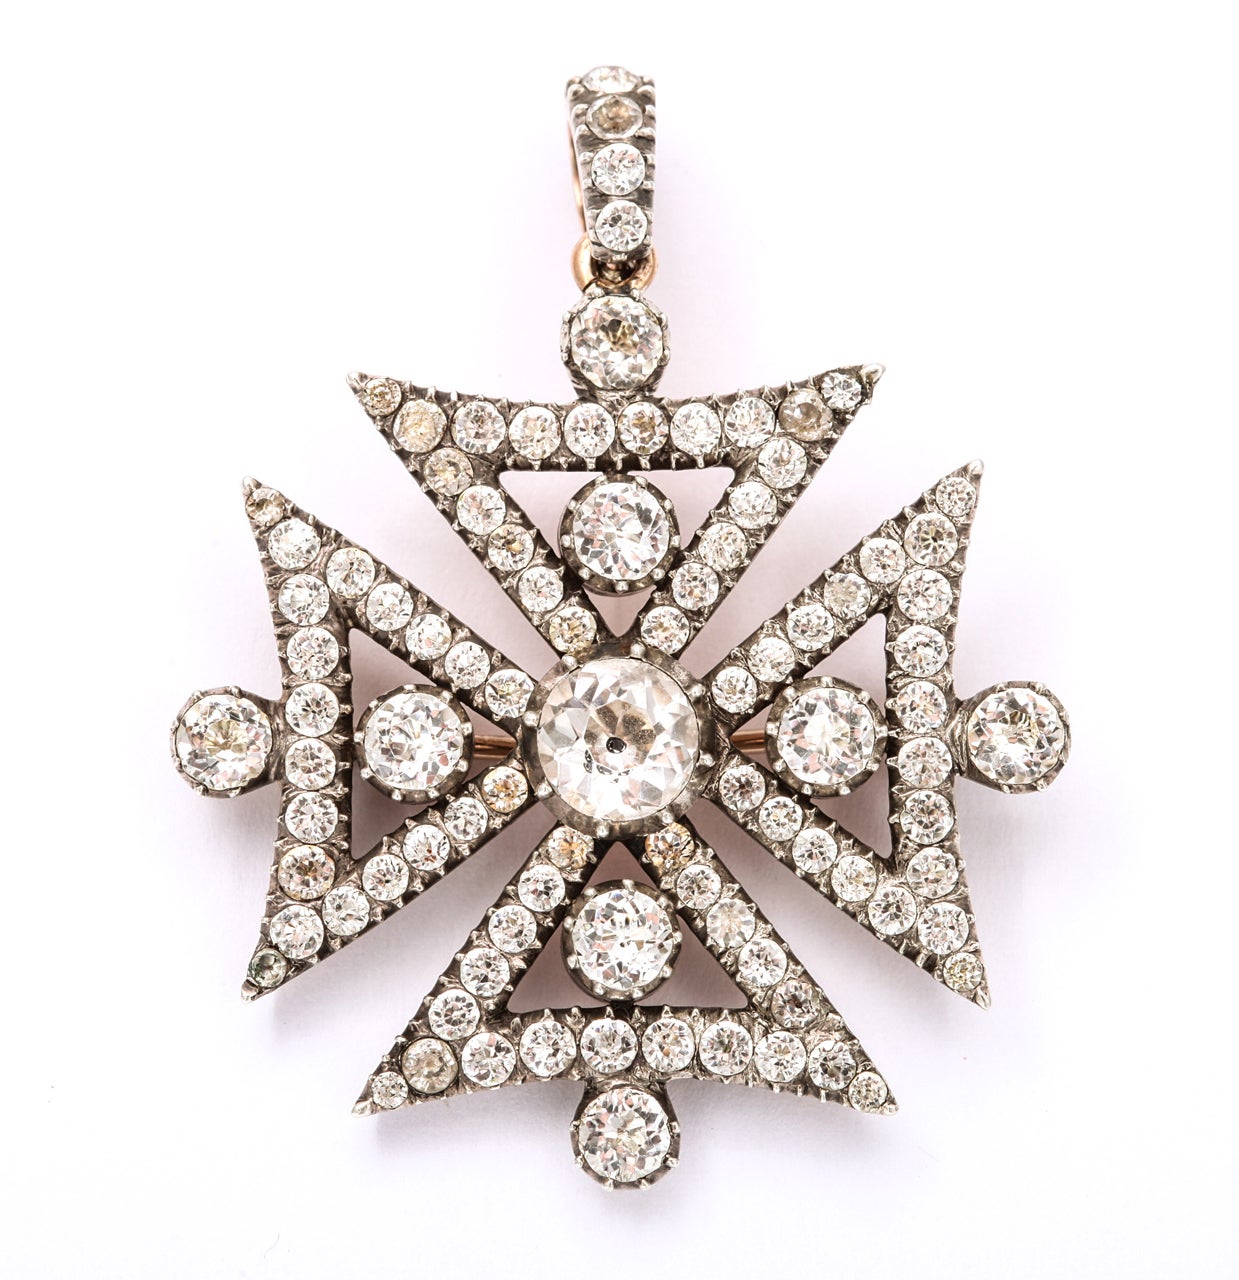 After years, (they show up rarely) with cheers, we offer a rock crystal maltese cross with clear, brilliant foiled stones.  The center stone is black dot in the style of an old mine diamond. Silver front to blend with the white crystal with no